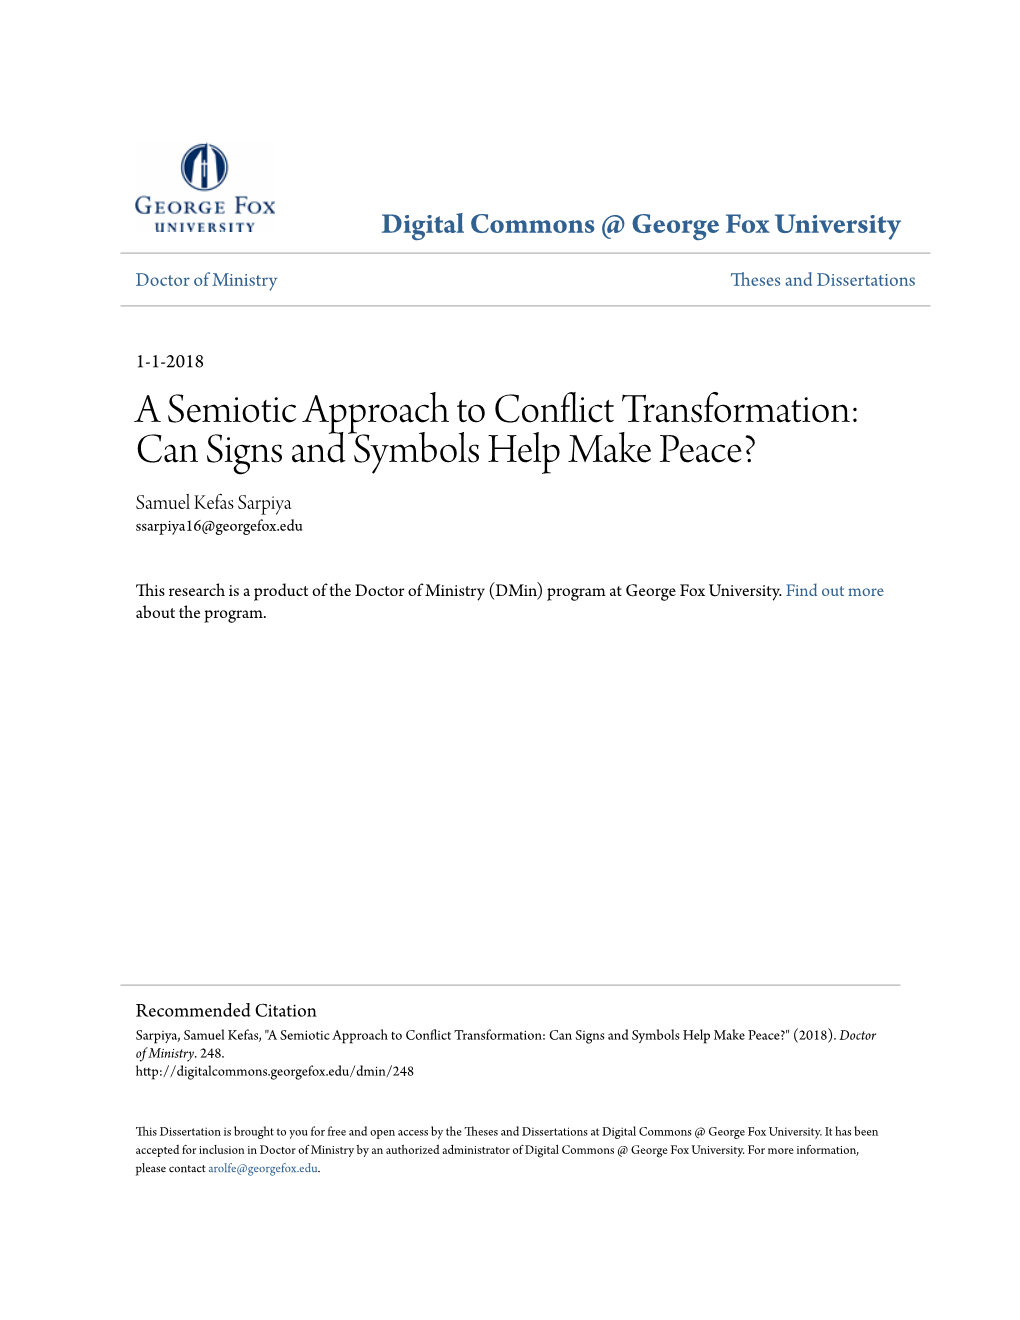 A Semiotic Approach to Conflict Transformation: Can Signs and Symbols Help Make Peace? Samuel Kefas Sarpiya Ssarpiya16@Georgefox.Edu